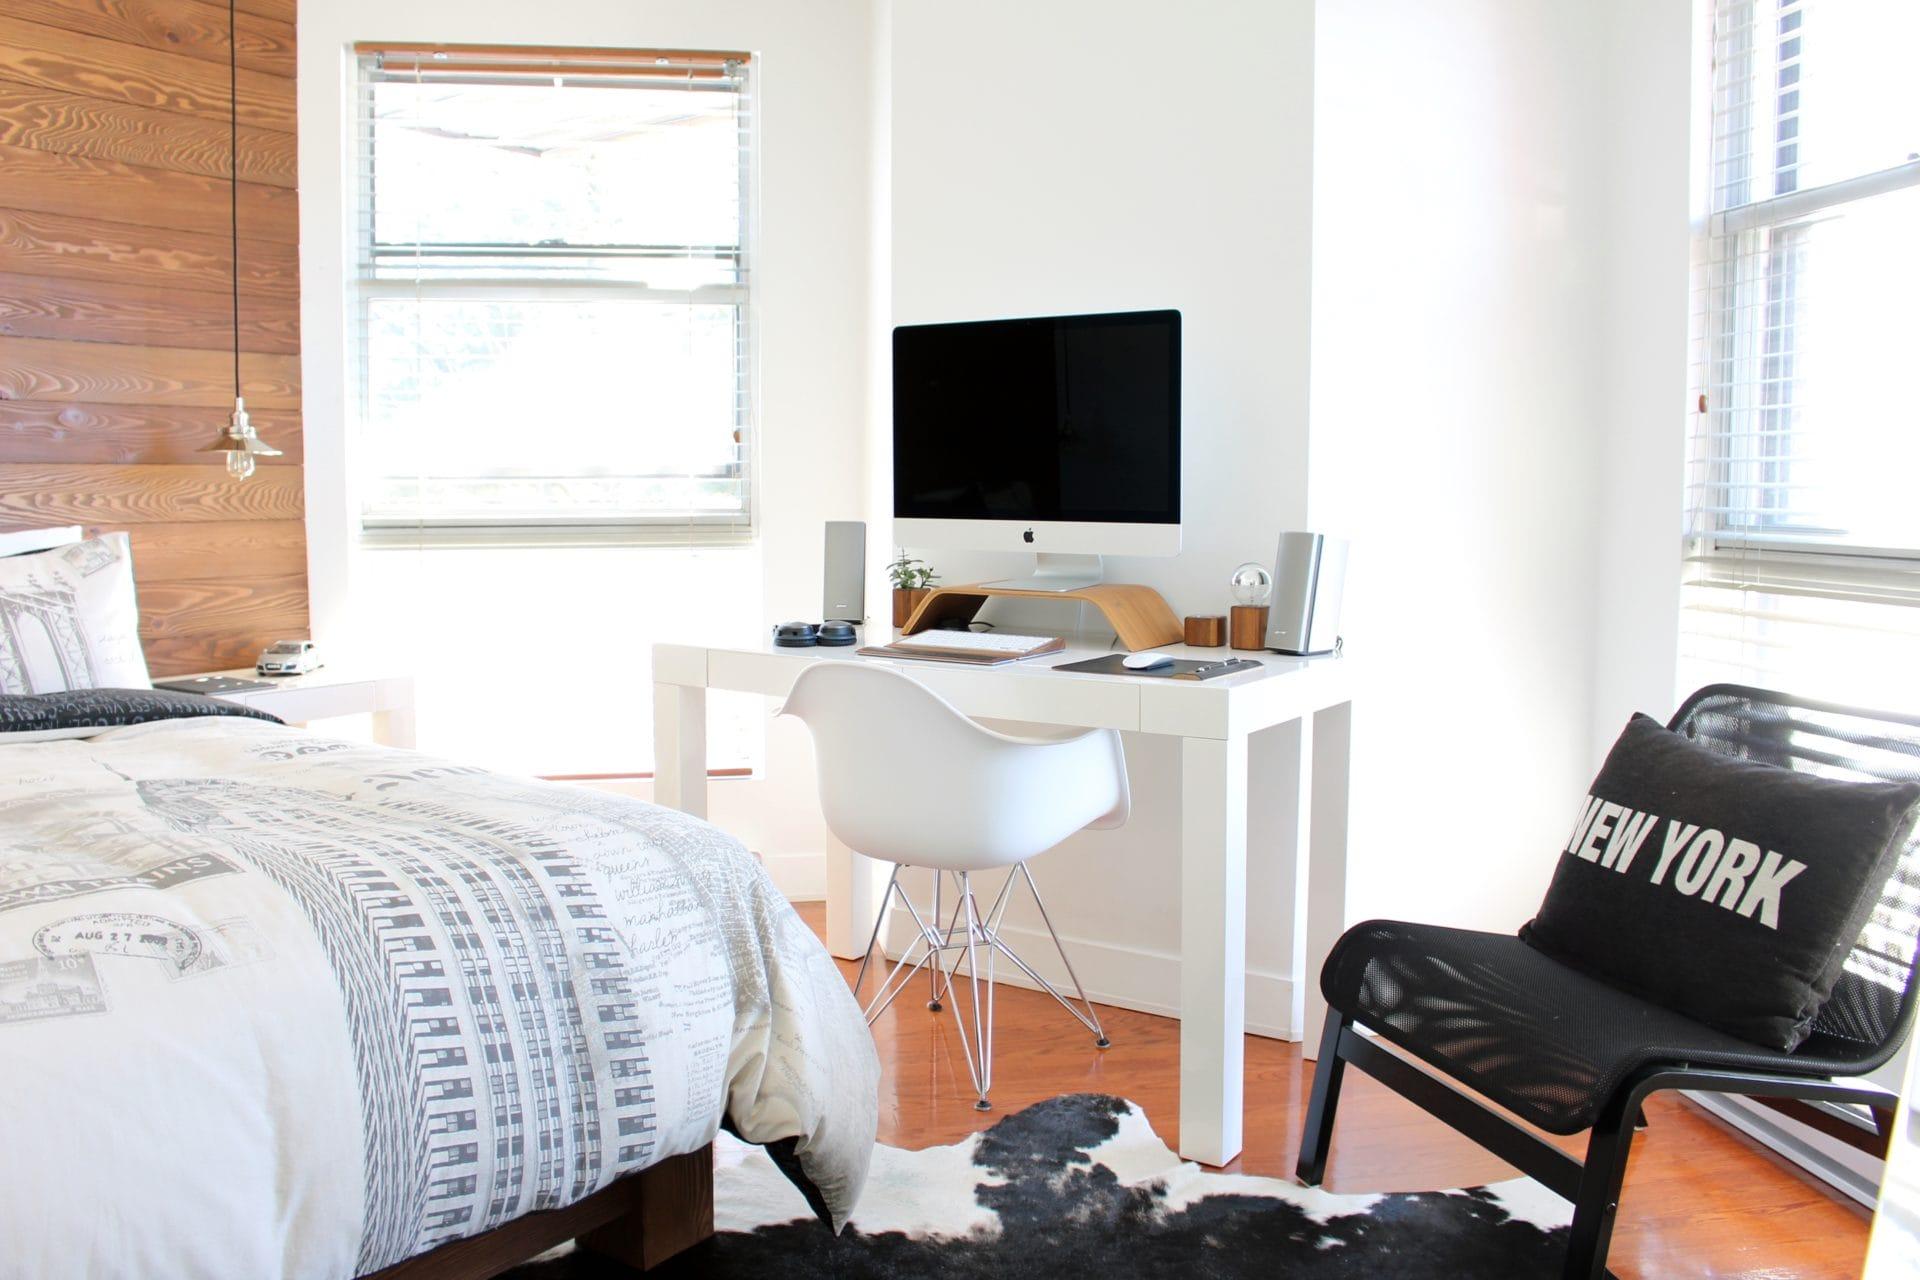 40x rule home rentals for students in New York